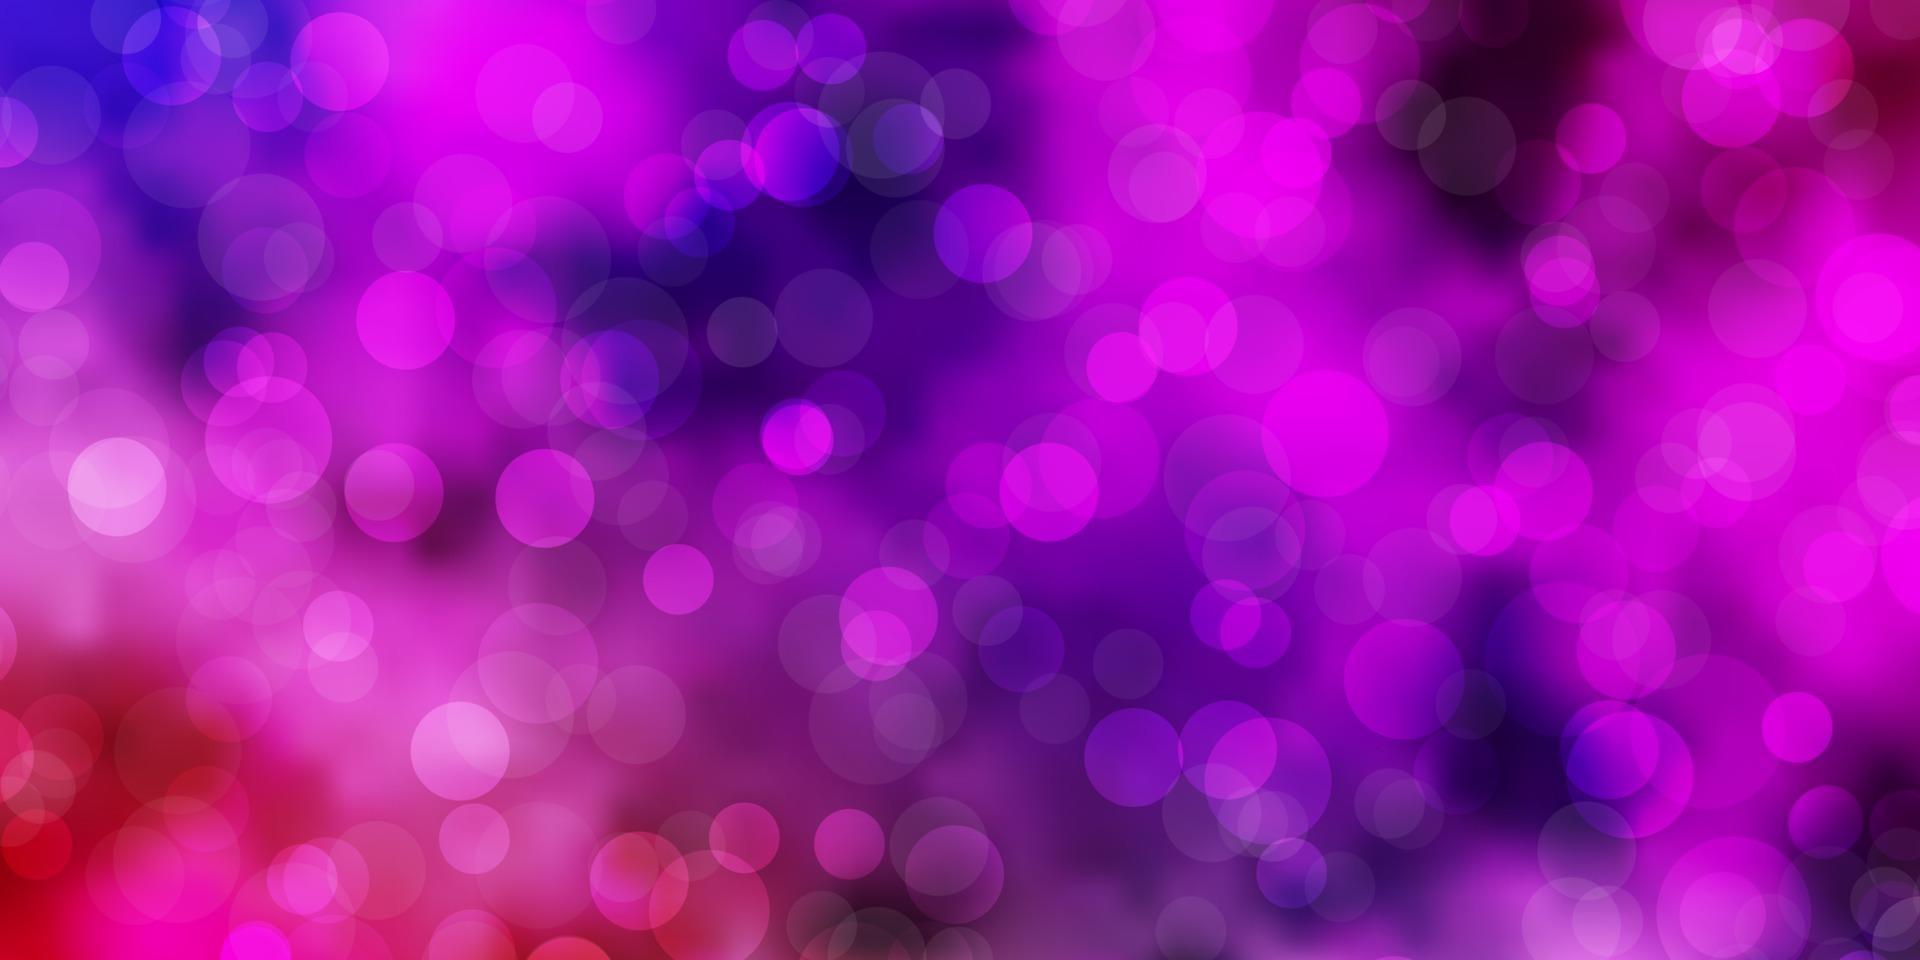 Light Multicolor vector background with circles.